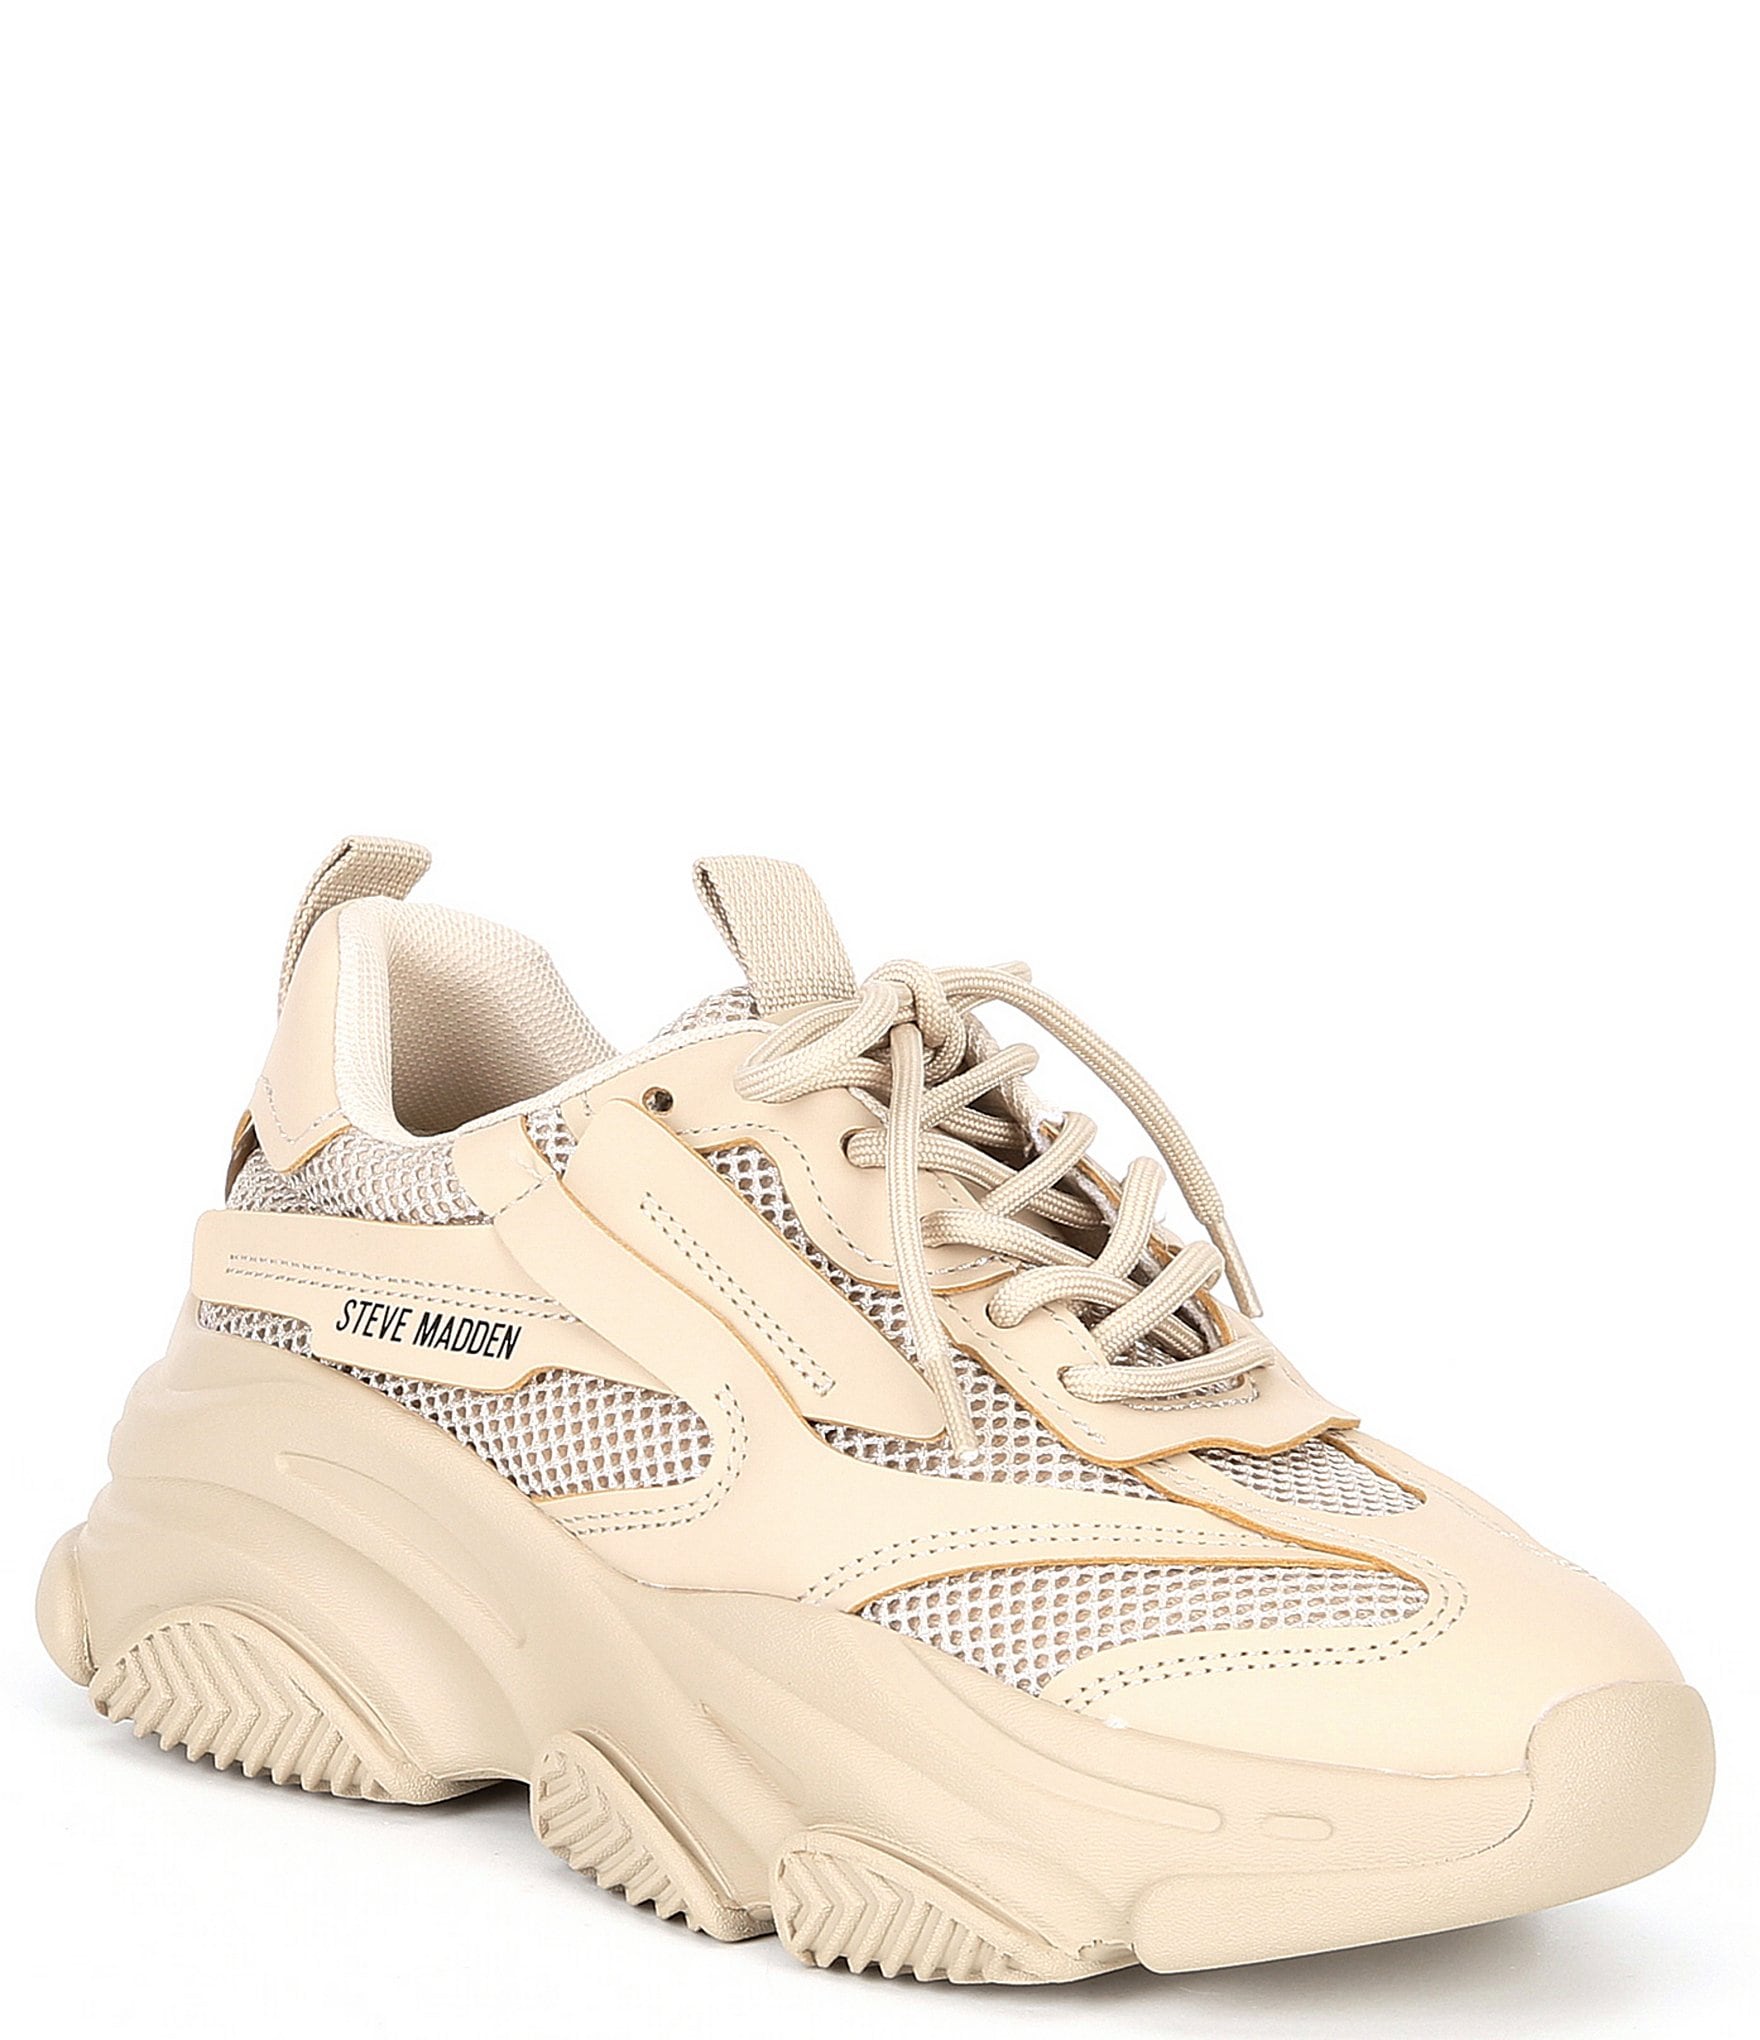 Steve Madden Possession Lace-Up Sneakers | Dillard's